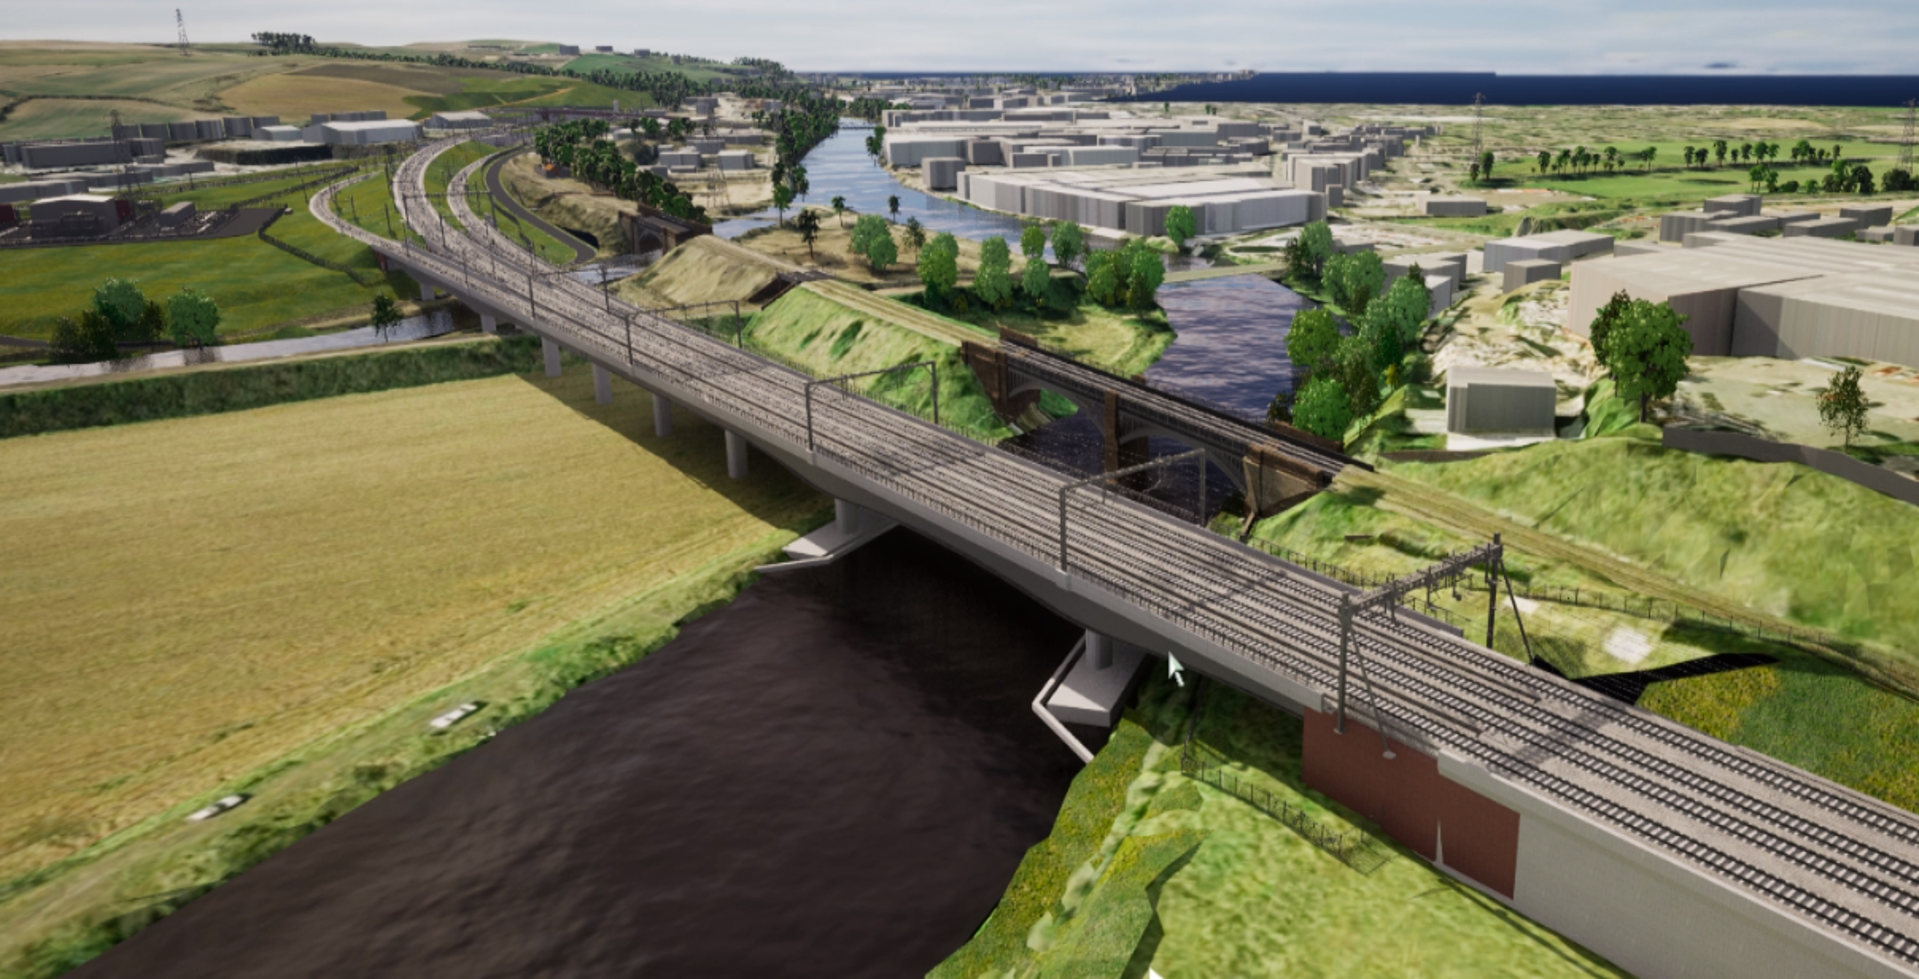 The planned transformation of Ravensthorpe Viaduct